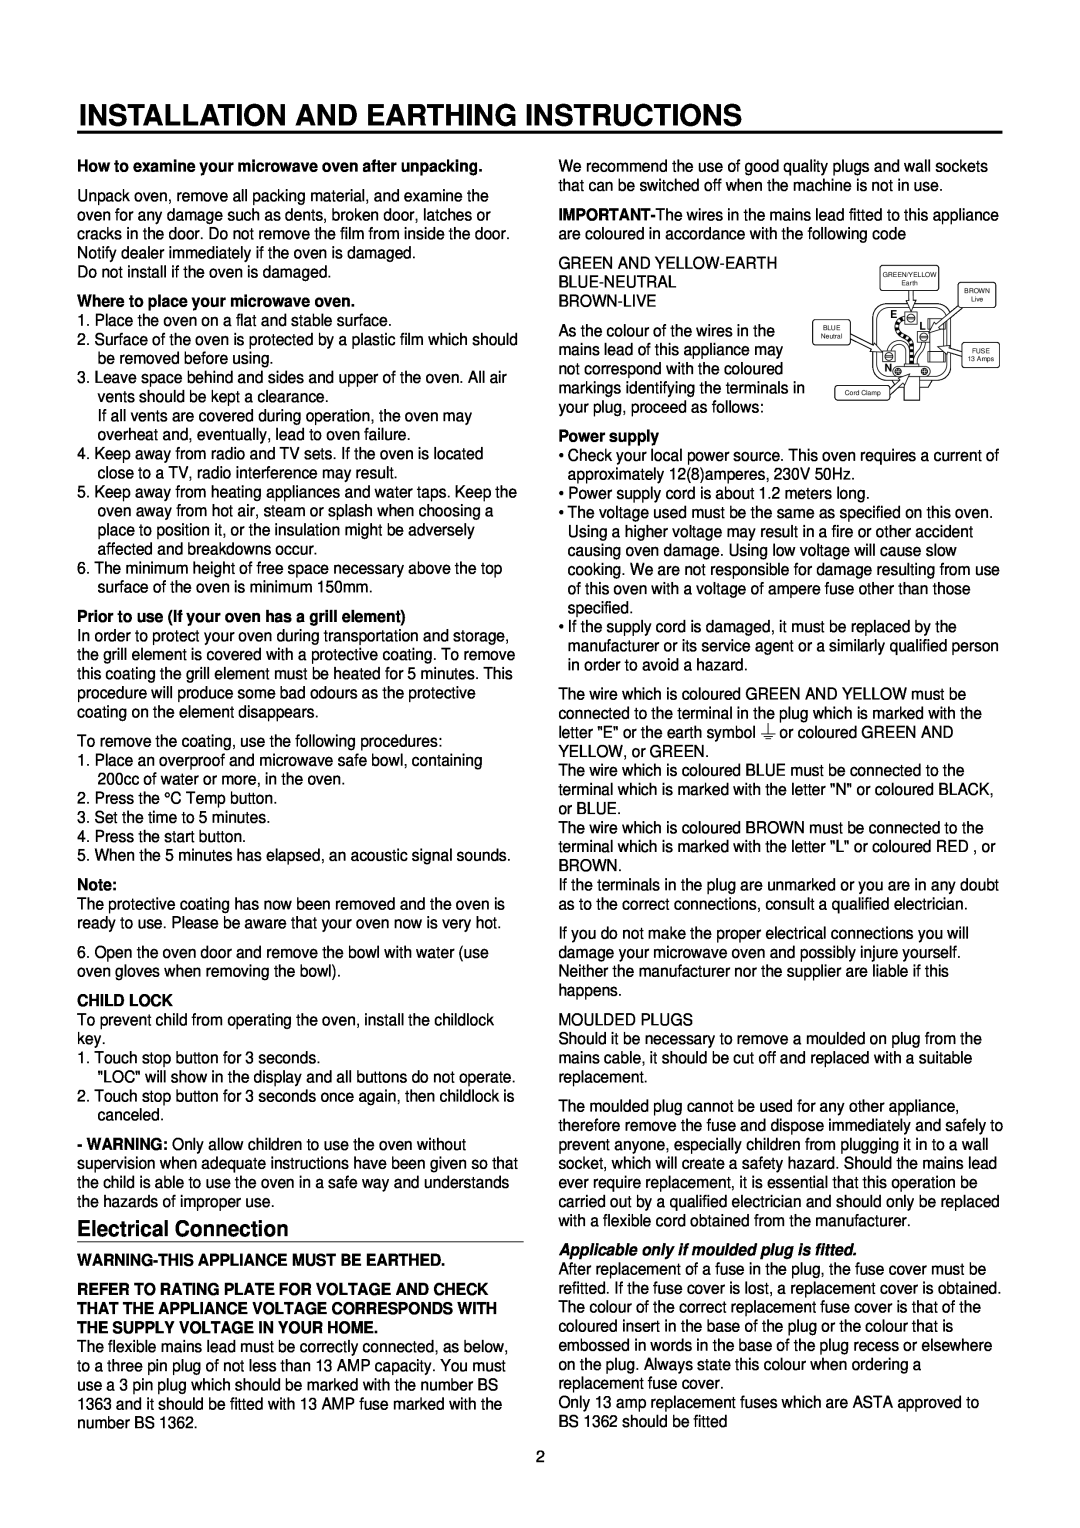 Daewoo KOC-873TSL manual Installation And Earthing Instructions, Electrical Connection, Where to place your microwave oven 